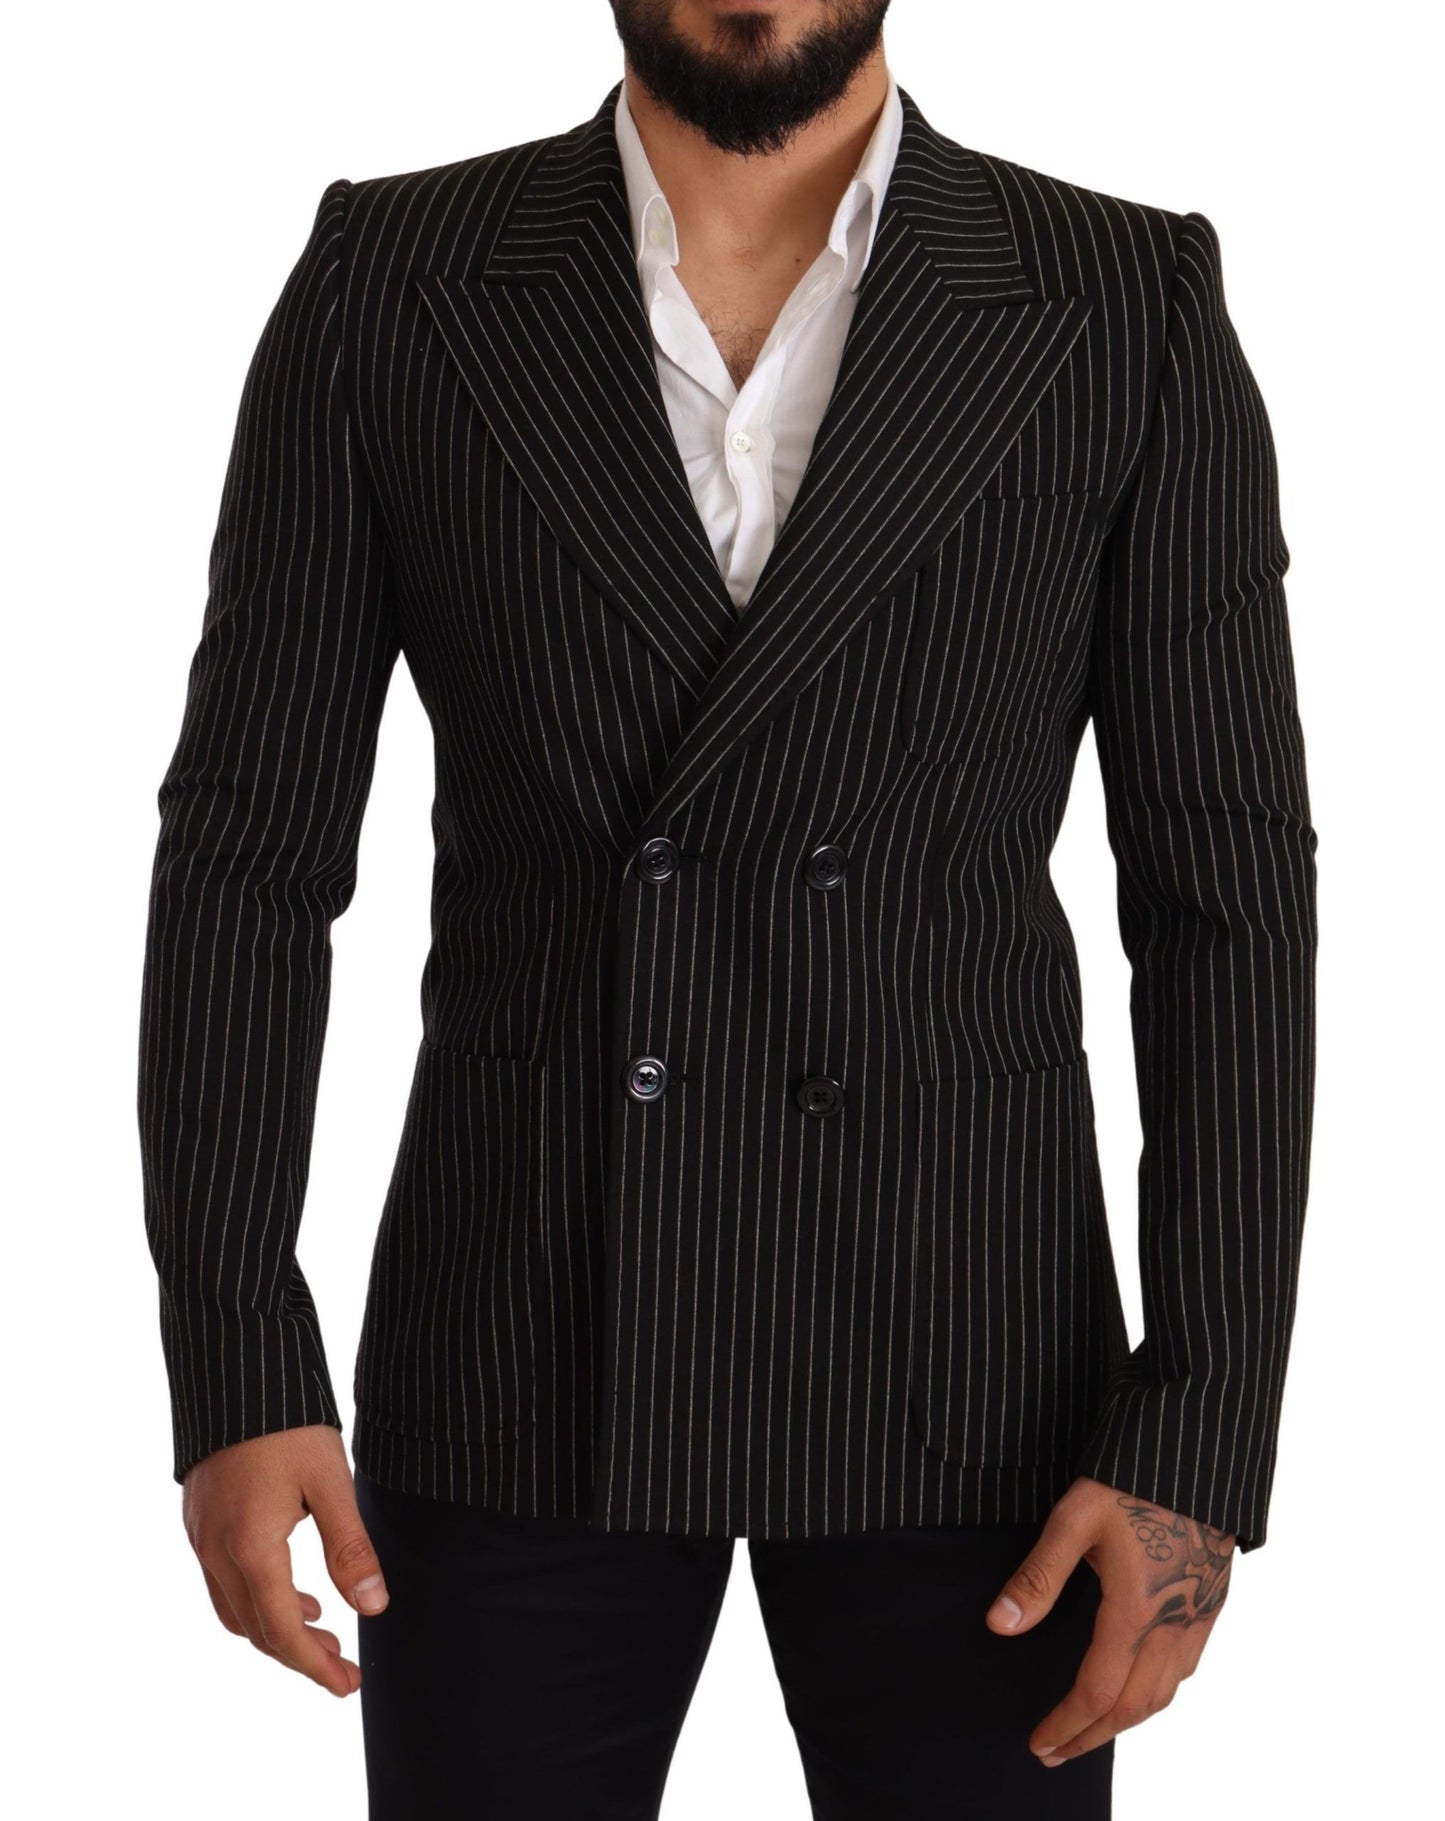 Black White Striped Slim Fit Coat Blazer - Designed by Dolce & Gabbana Available to Buy at a Discounted Price on Moon Behind The Hill Online Designer Discount Store